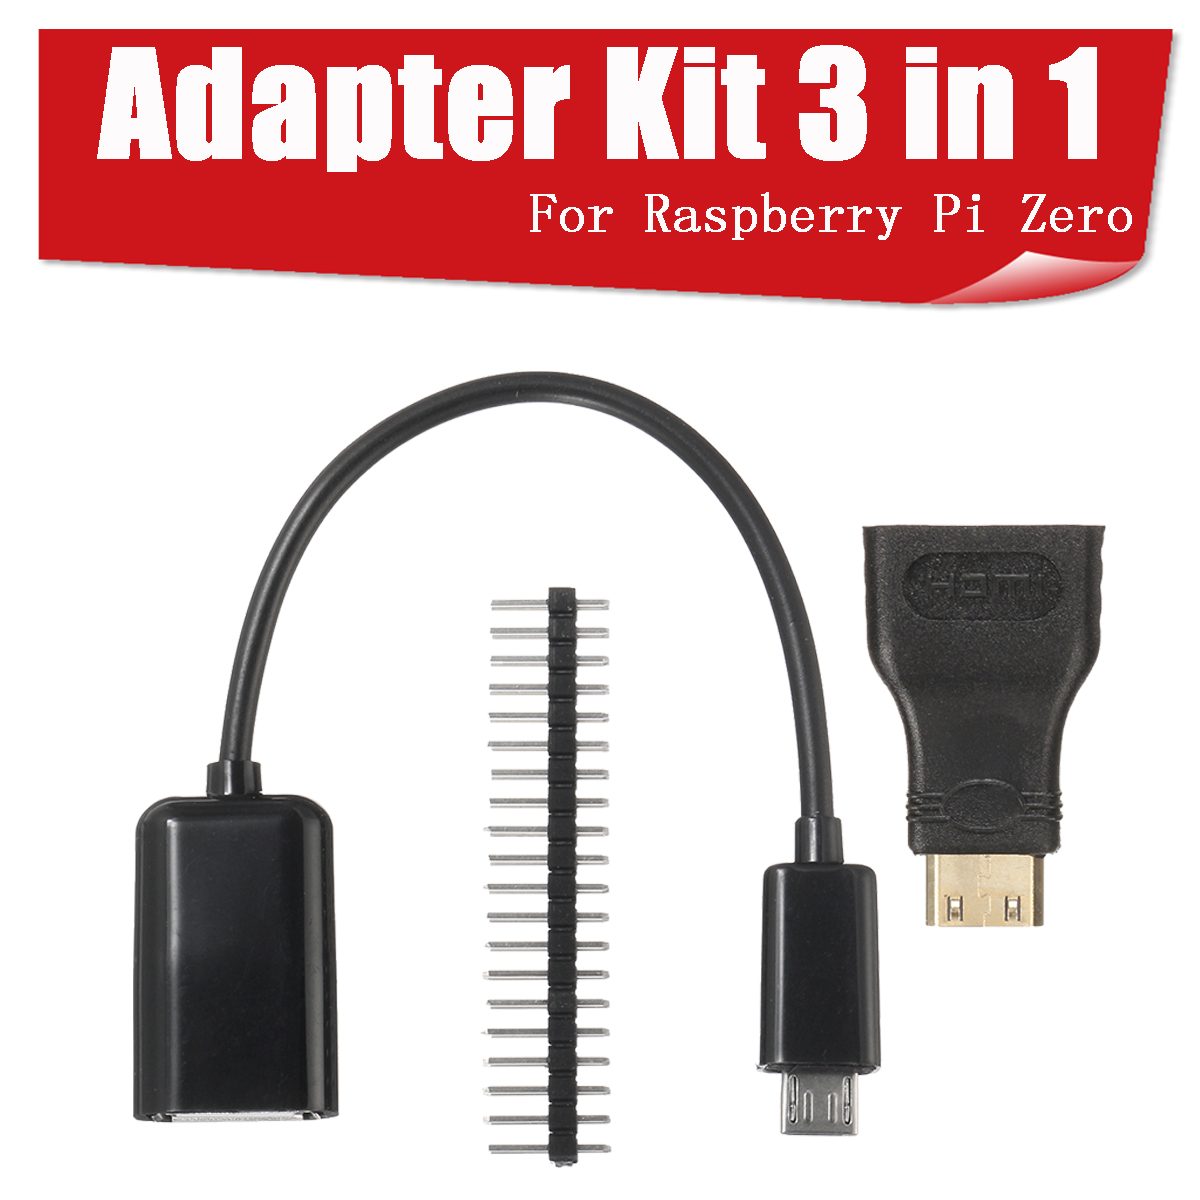 3 in 1 Mini HD to HD Adapter+Micro USB to USB Female Power Cable+40P Pin Kits For Raspberry Pi Zero 7